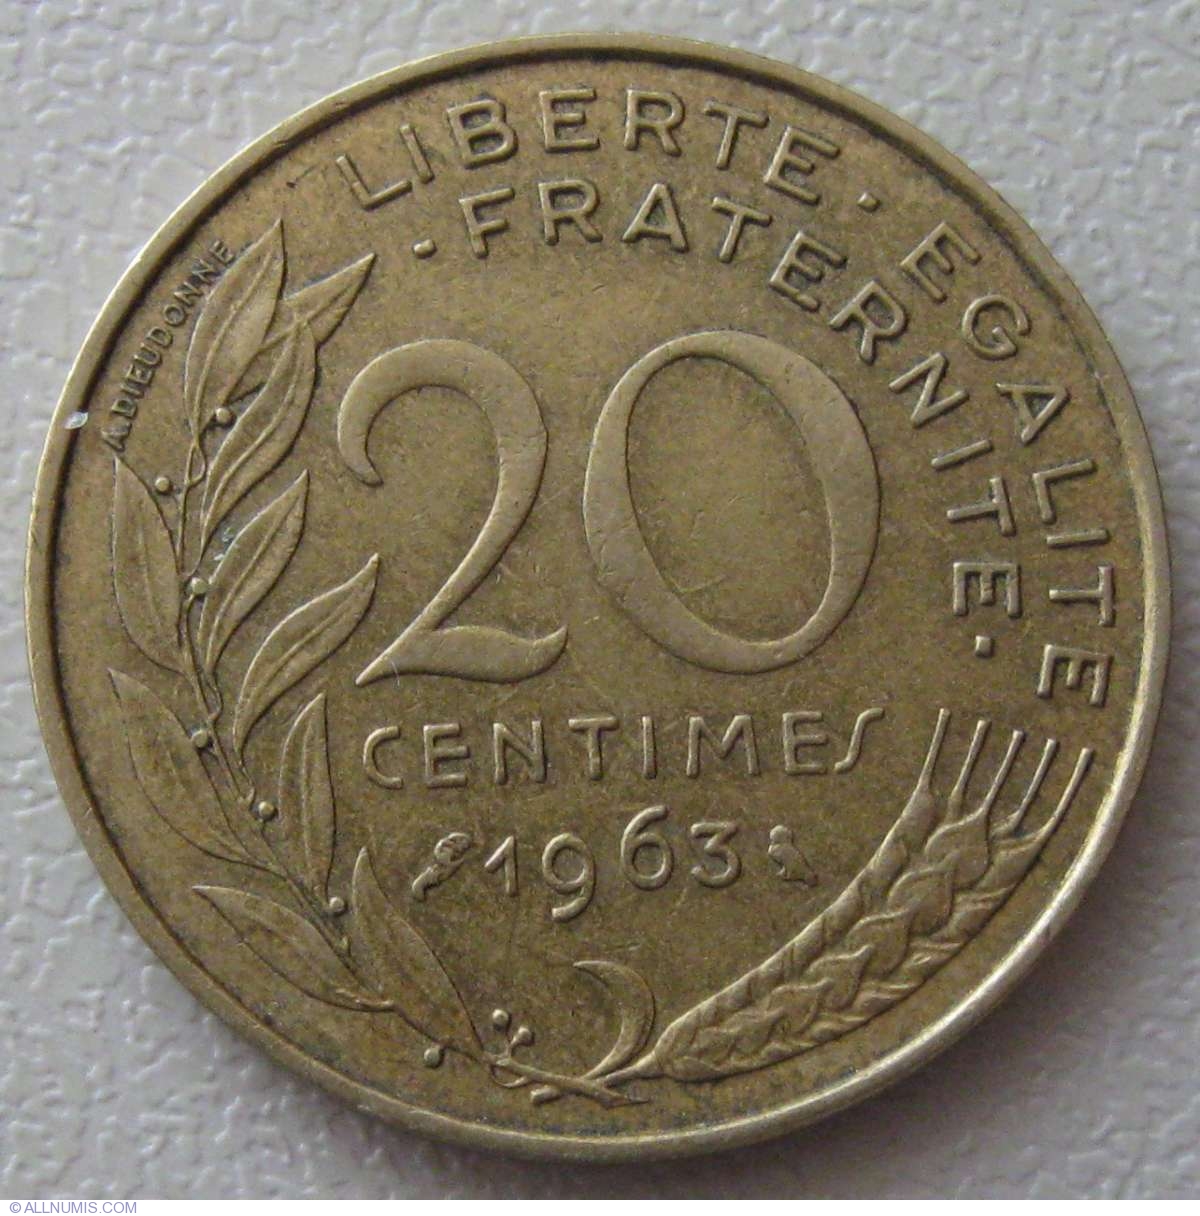 1963 10 centimes coin value